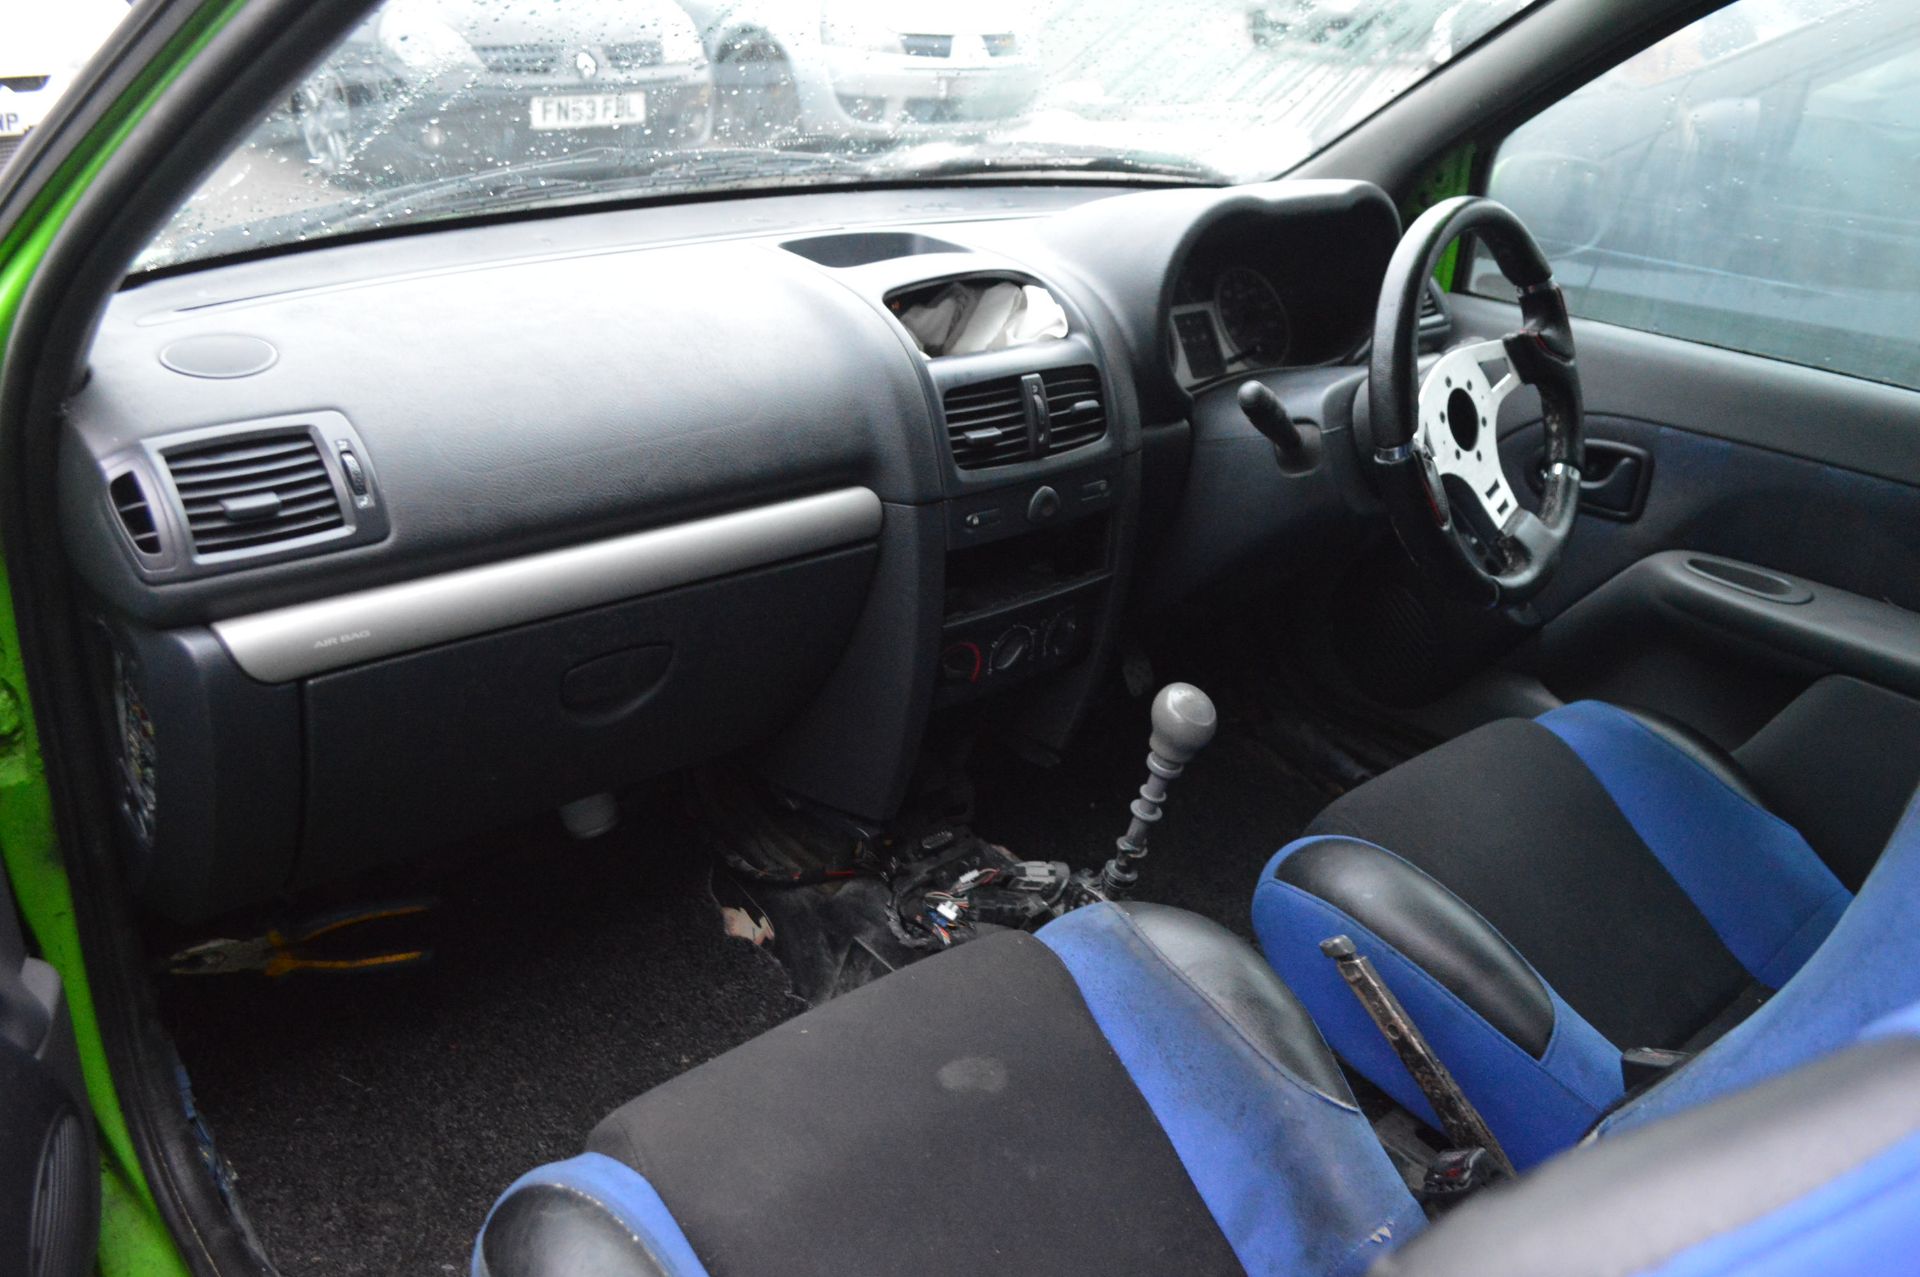 2001 RENAULT CLIO PH1 V6 RECREATION TURBO CHARGED 238BHP - Image 8 of 12